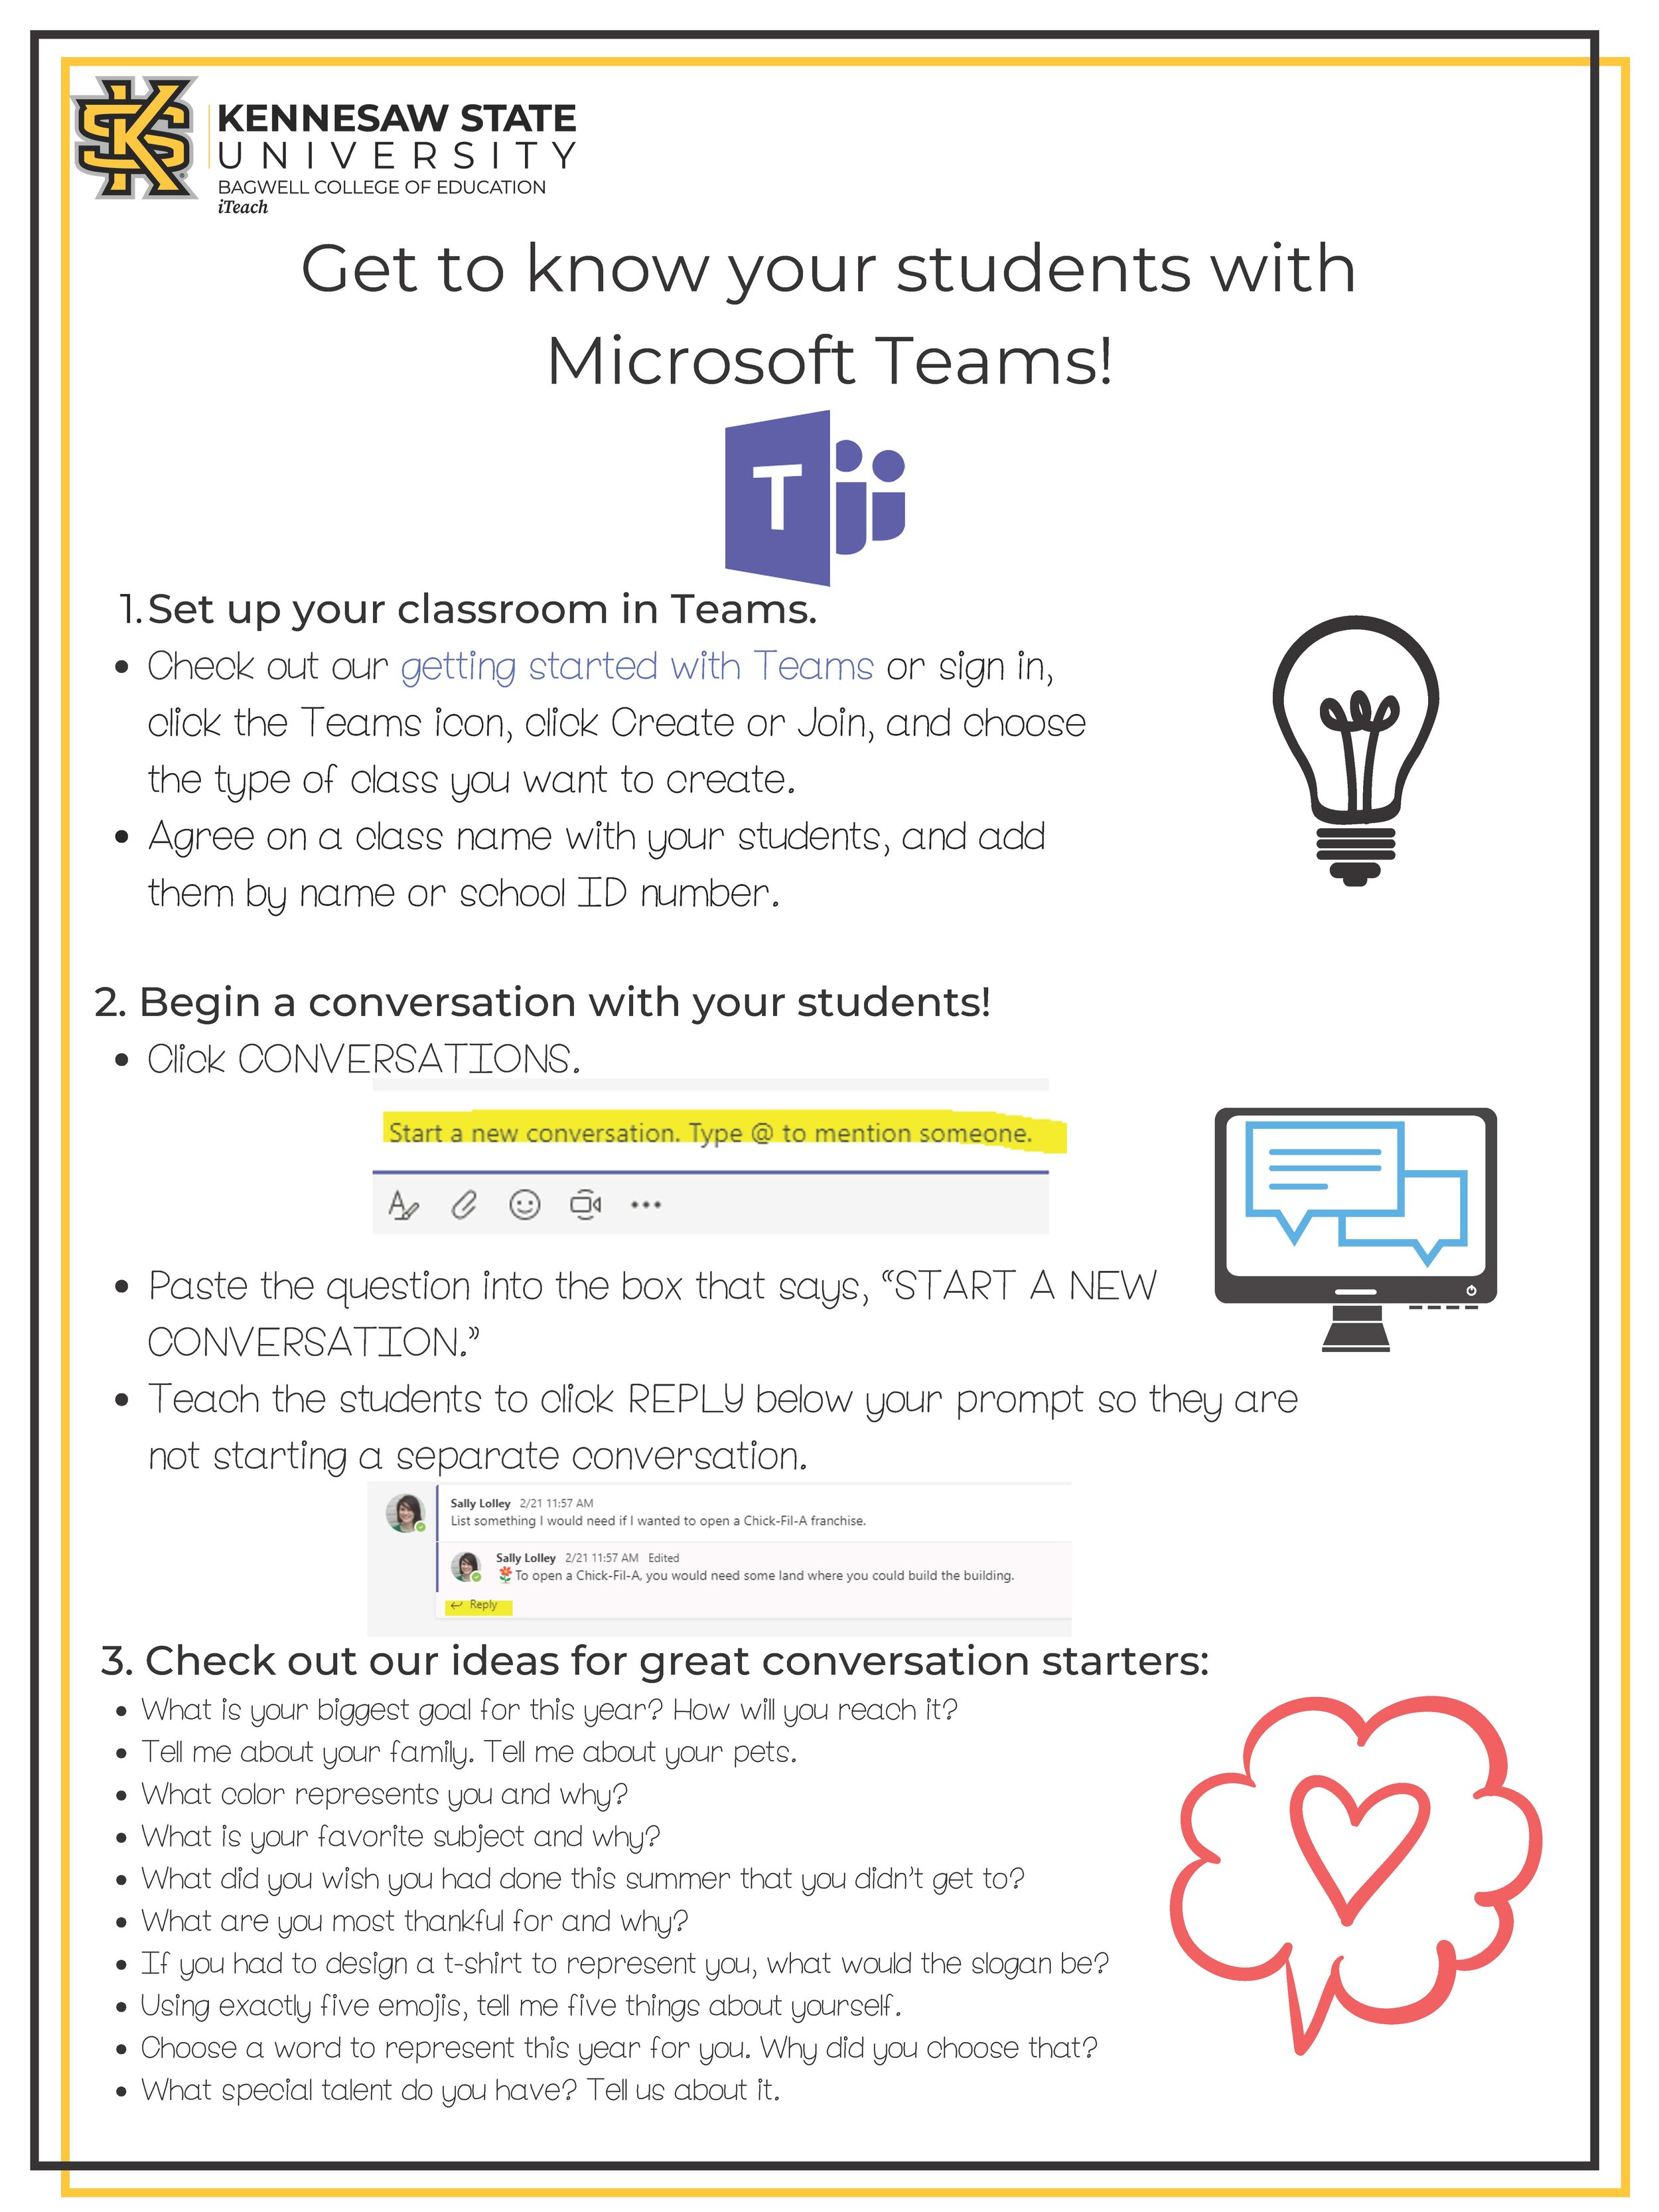 Get to know your students with Microsoft Teams.jpg